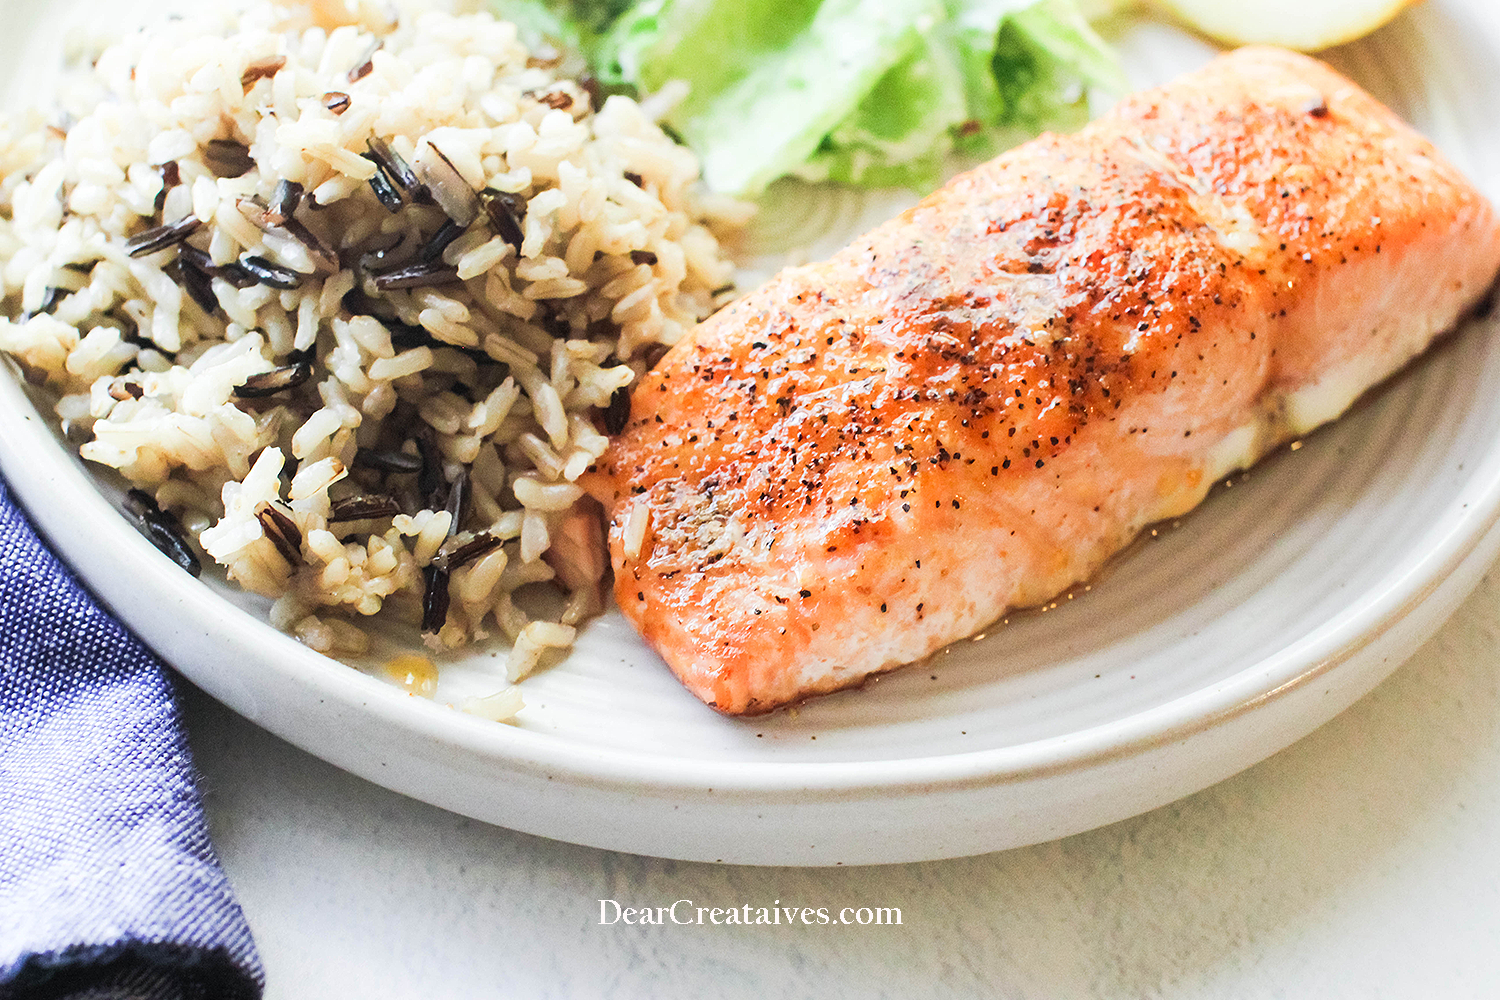 Close up of baked salmon on a plate with wild rice and a salad - Recipe for salmon at © DearCreatives.com